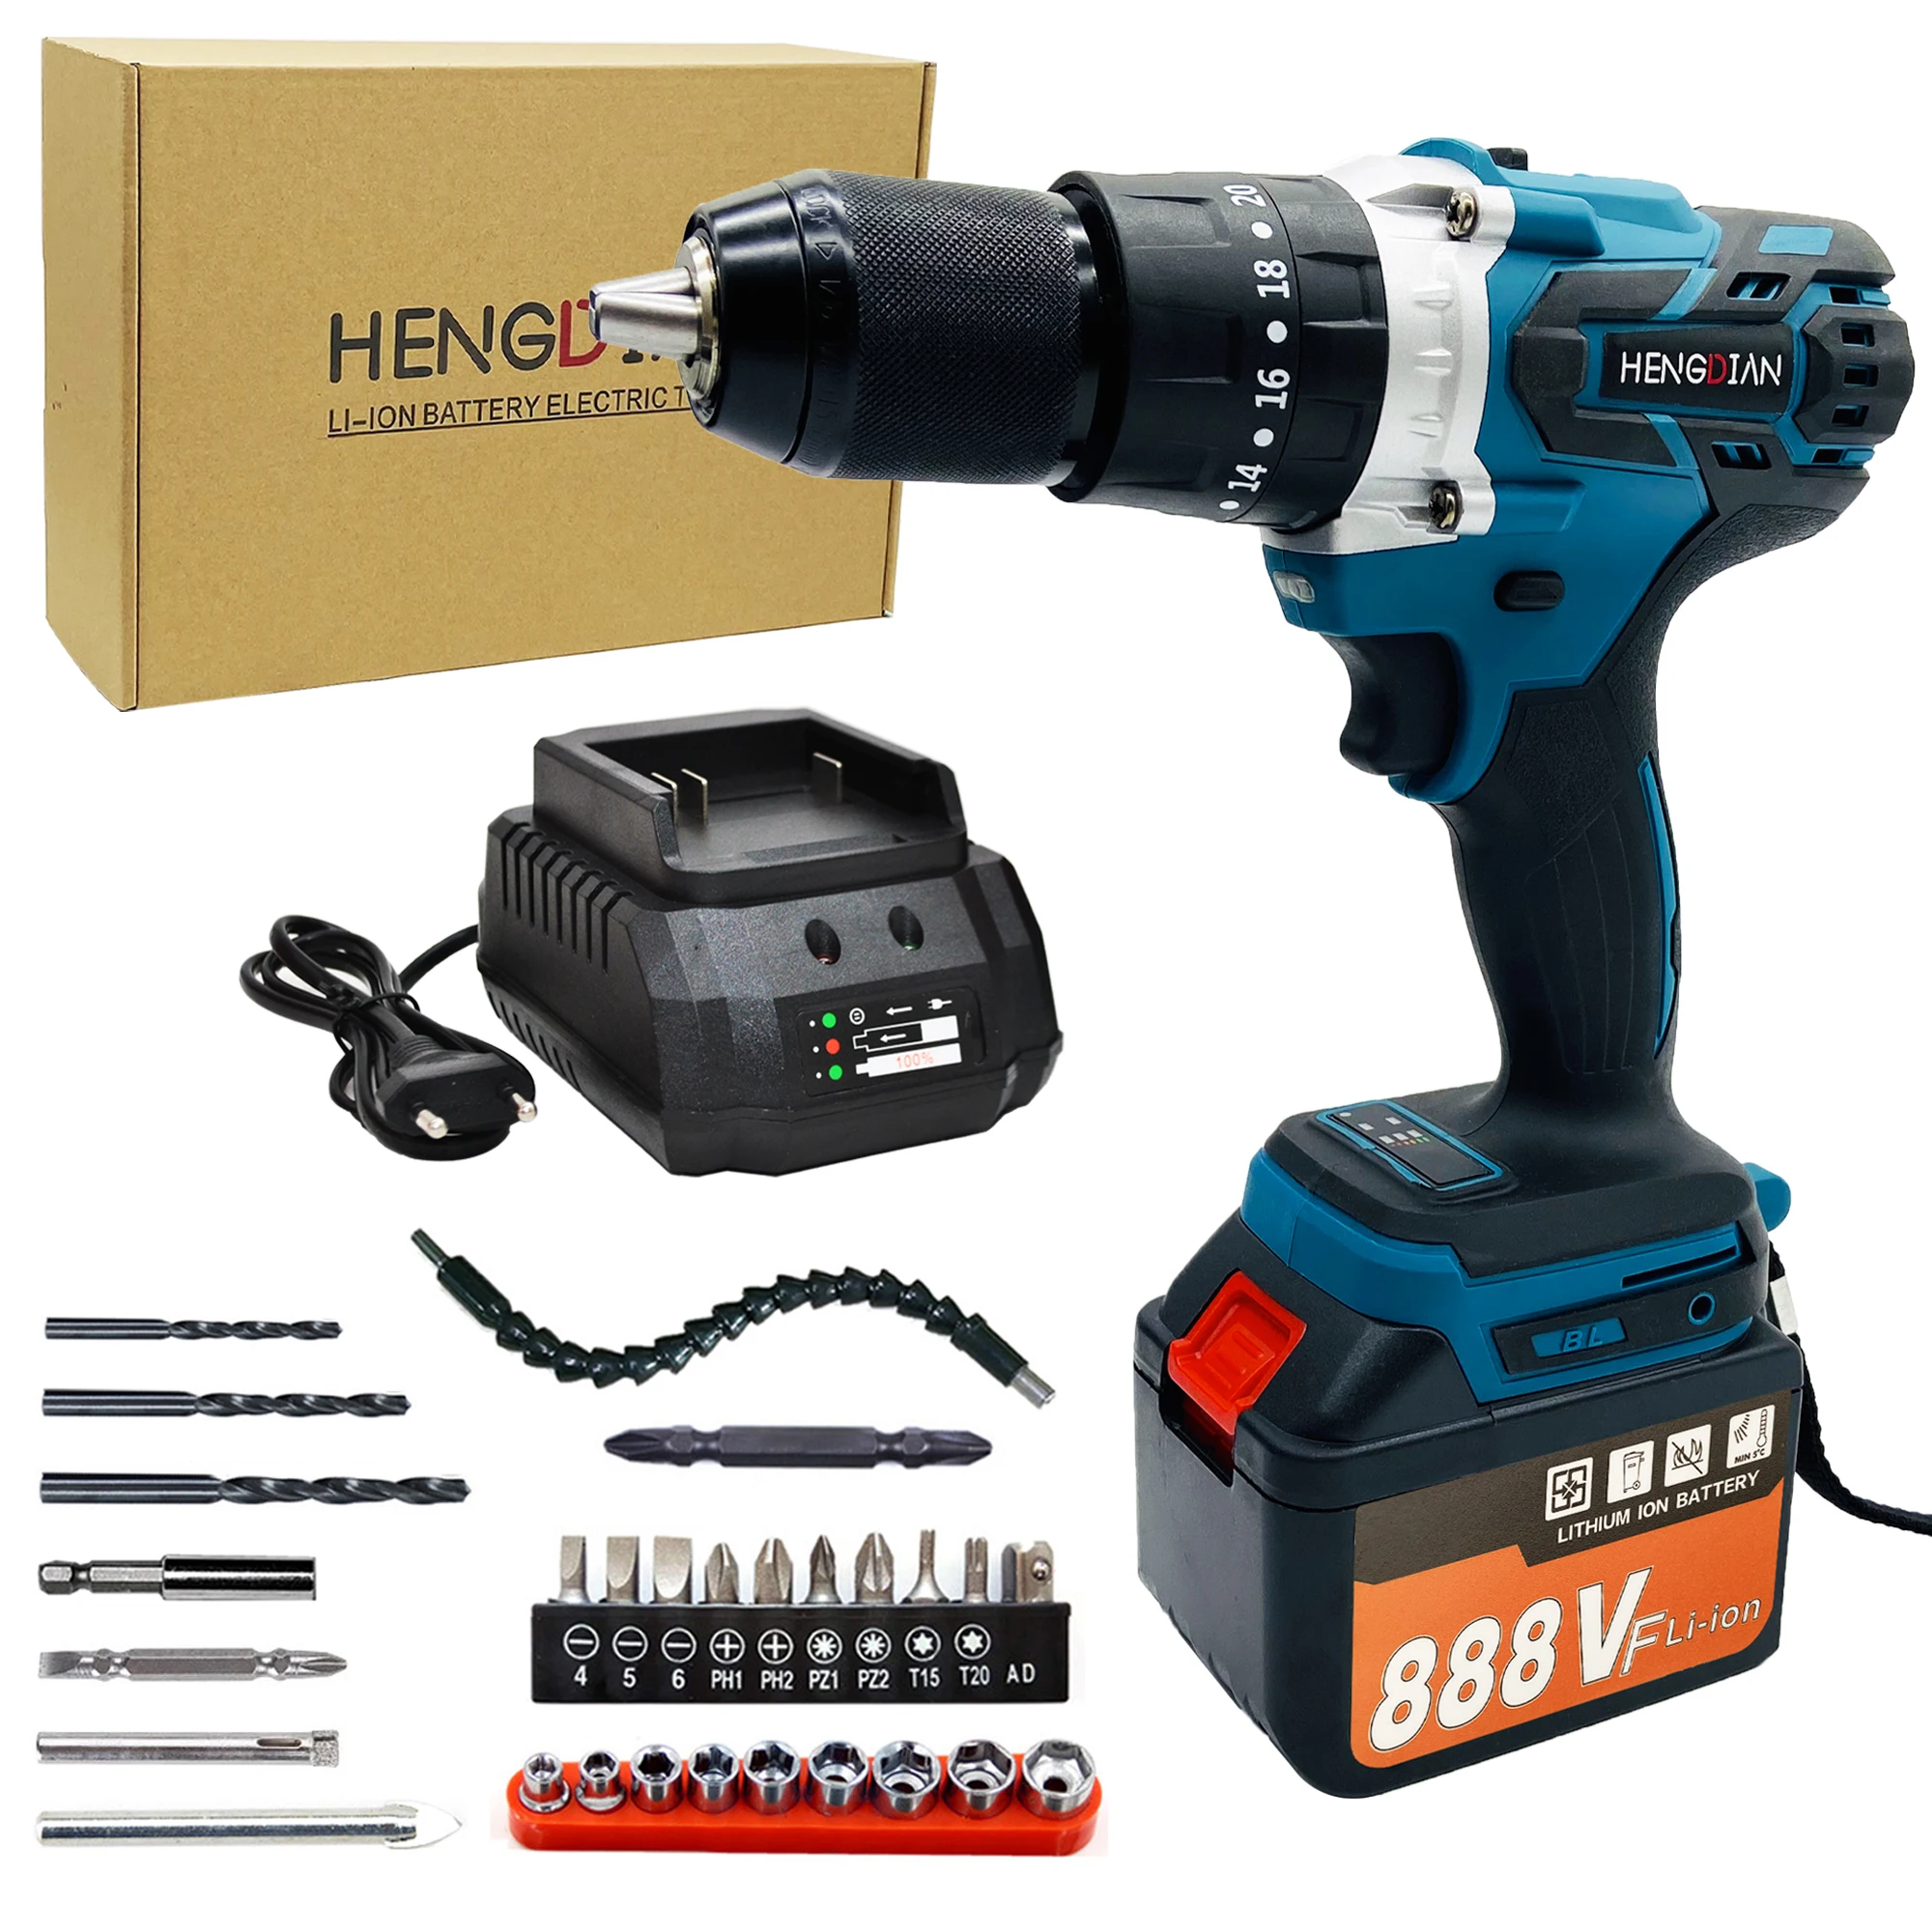 cordless impact screwdriver machine brushless electric screwdriver drill driver with two speed adjustment and powerful drill bit 20V Brushless Battery Screwdriver Craft Drill Set Adjustable Torque Machine Impact Cordless Power Tools Electric Drill